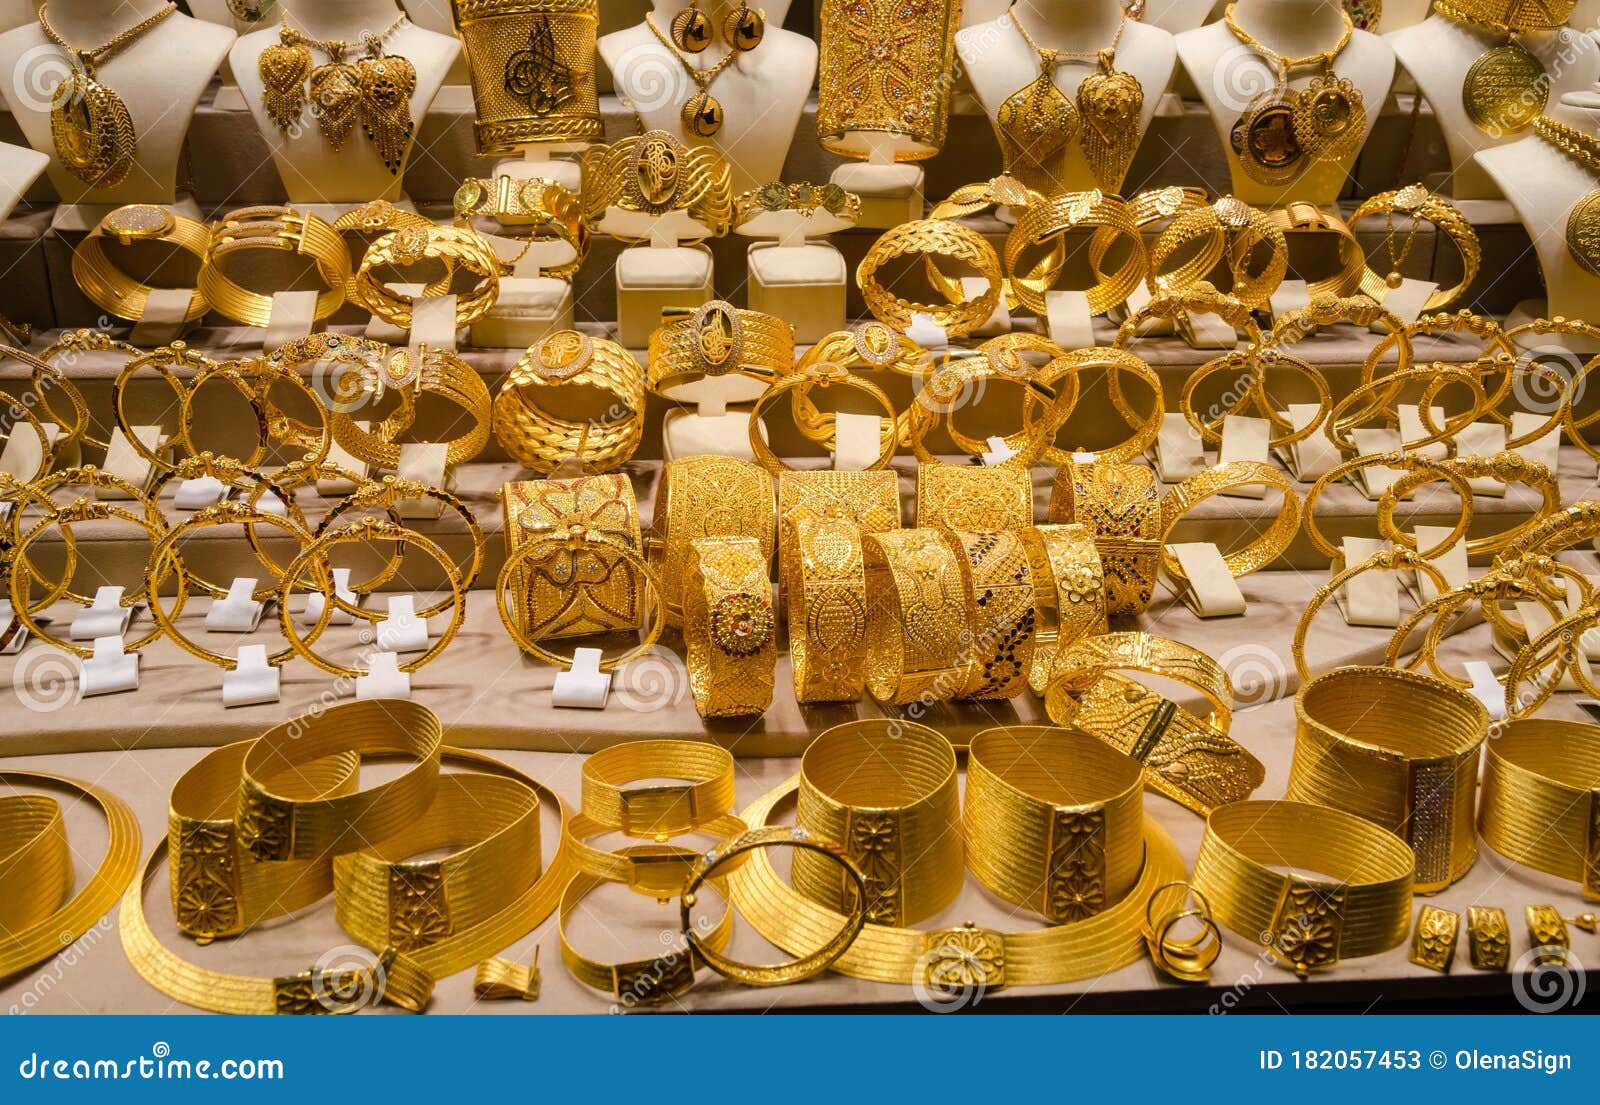 Gold Jewelry at the Egyptian Bazaar and the Grand Bazaar in Istanbul ...